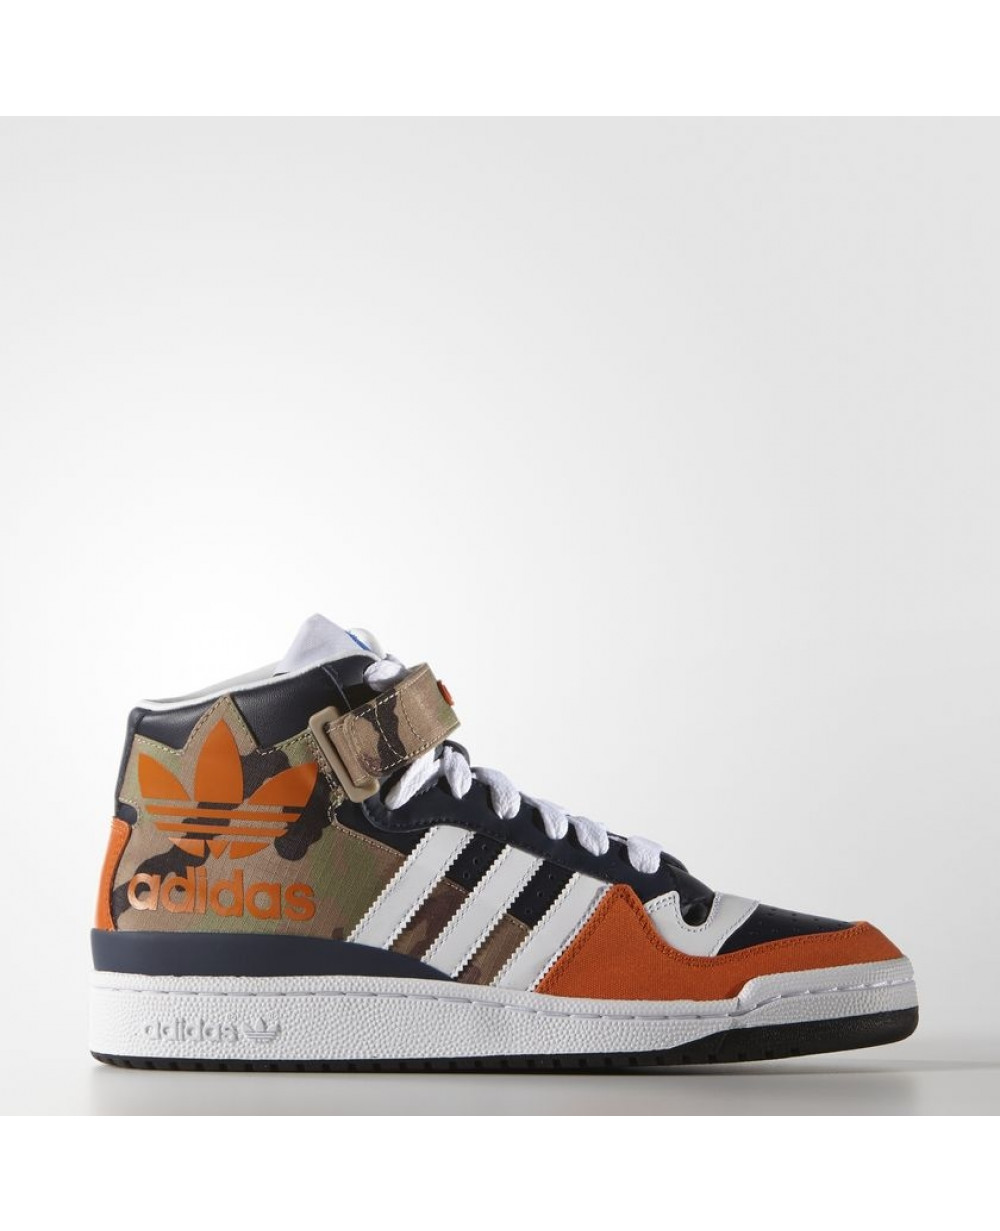 Adidas Forum Mid Rs Xl 525 AED Shoes 